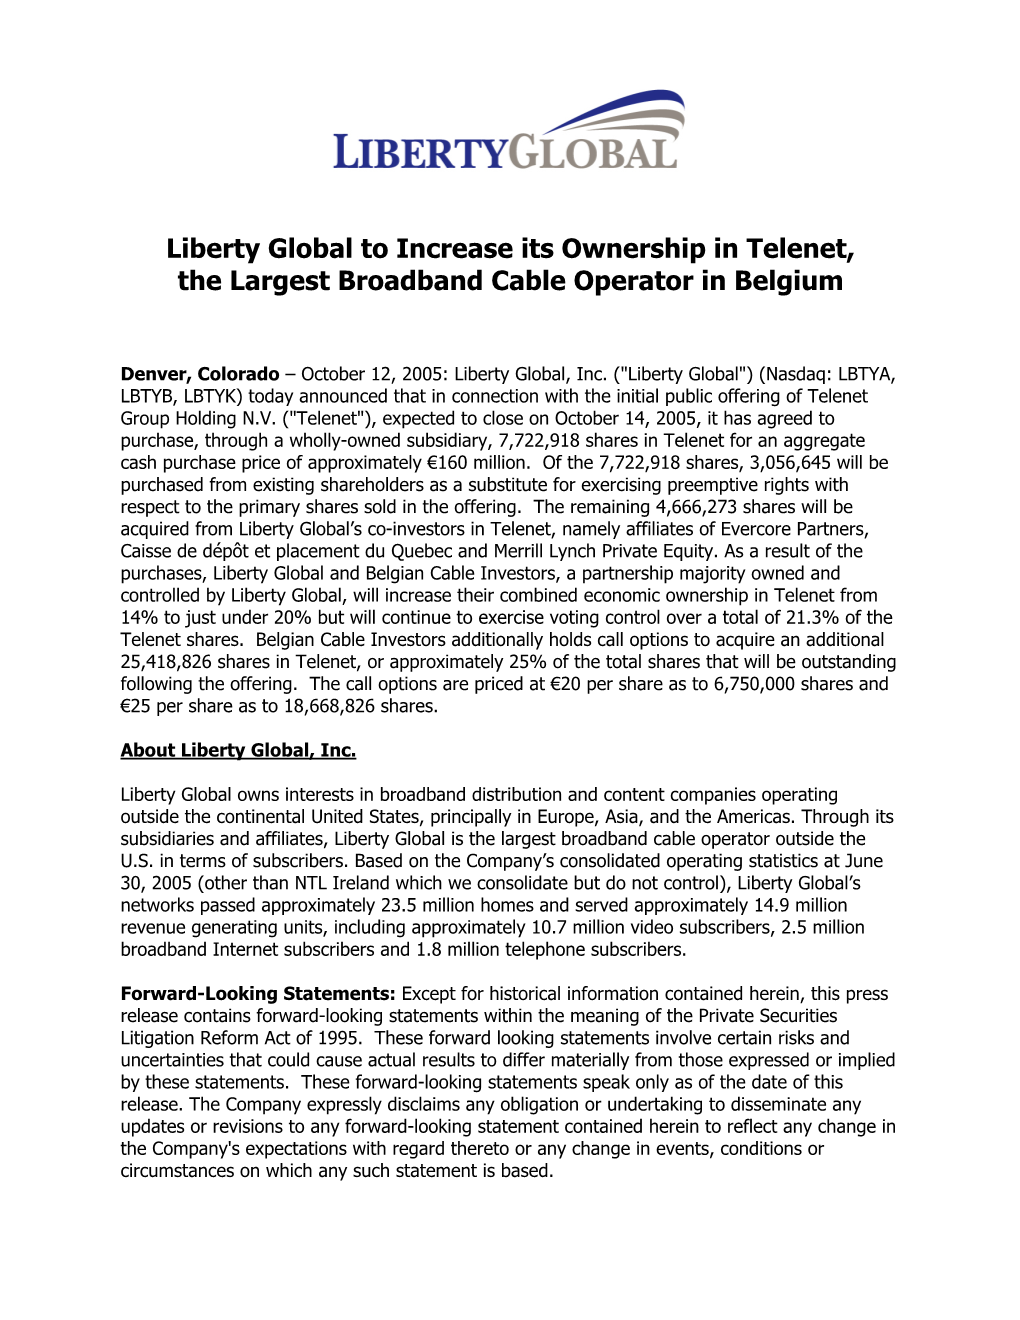 Liberty Global to Increase Its Ownership in Telenet, the Largest Broadband Cable Operator in Belgium